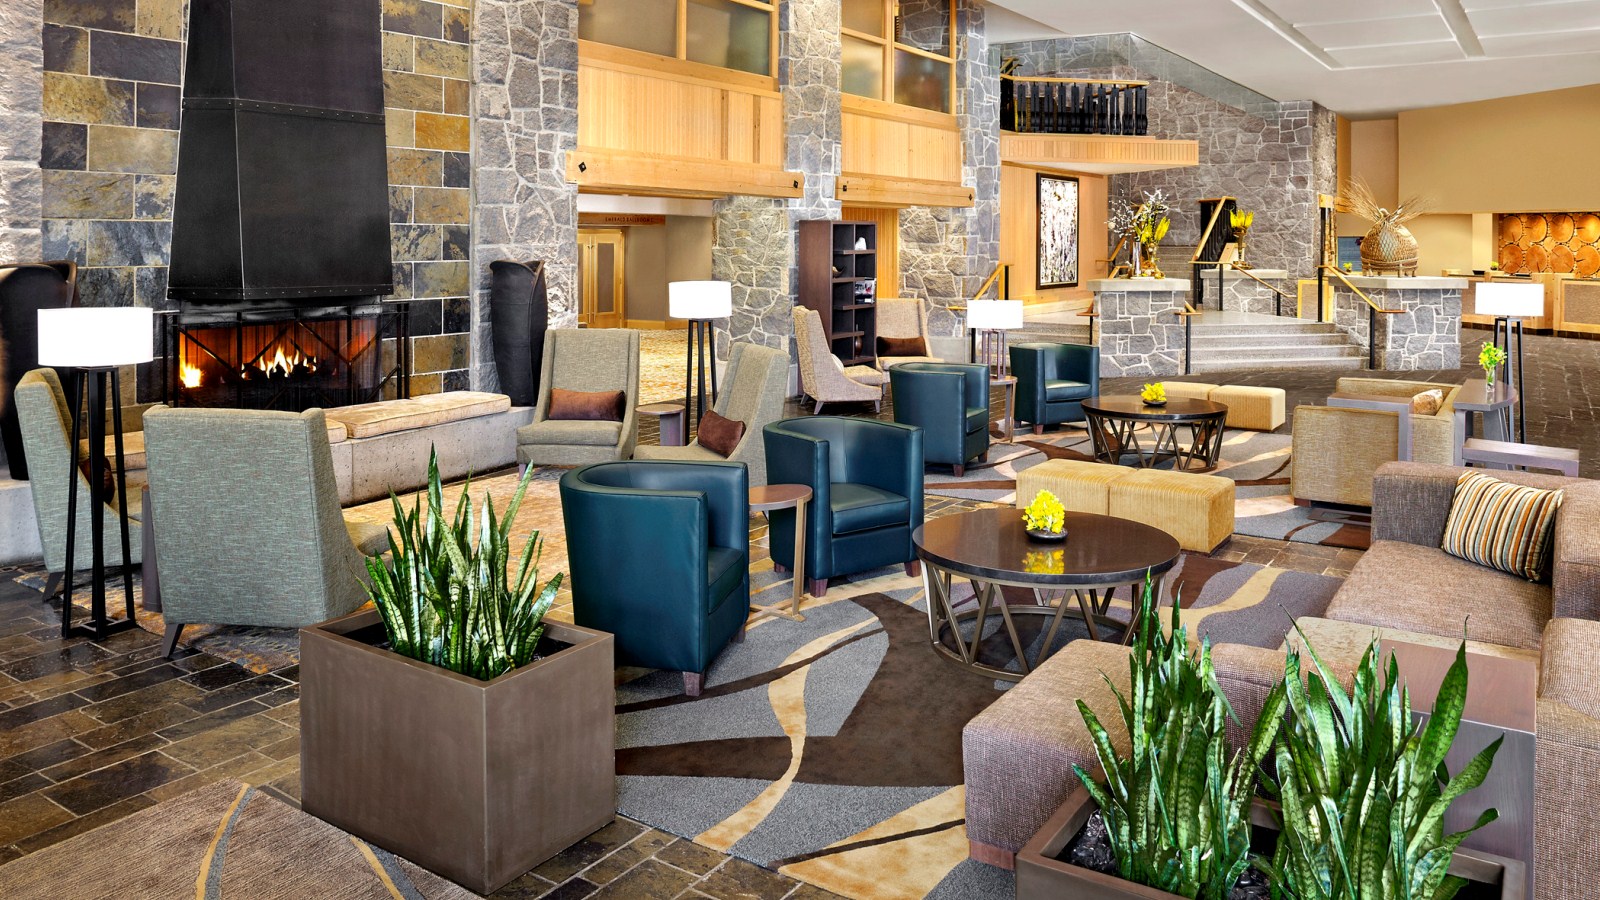 Westin Resort and Spa Whistler offers you 4 star comfort and luxury with convenient private apartments equipped with a kitchen and dining room.